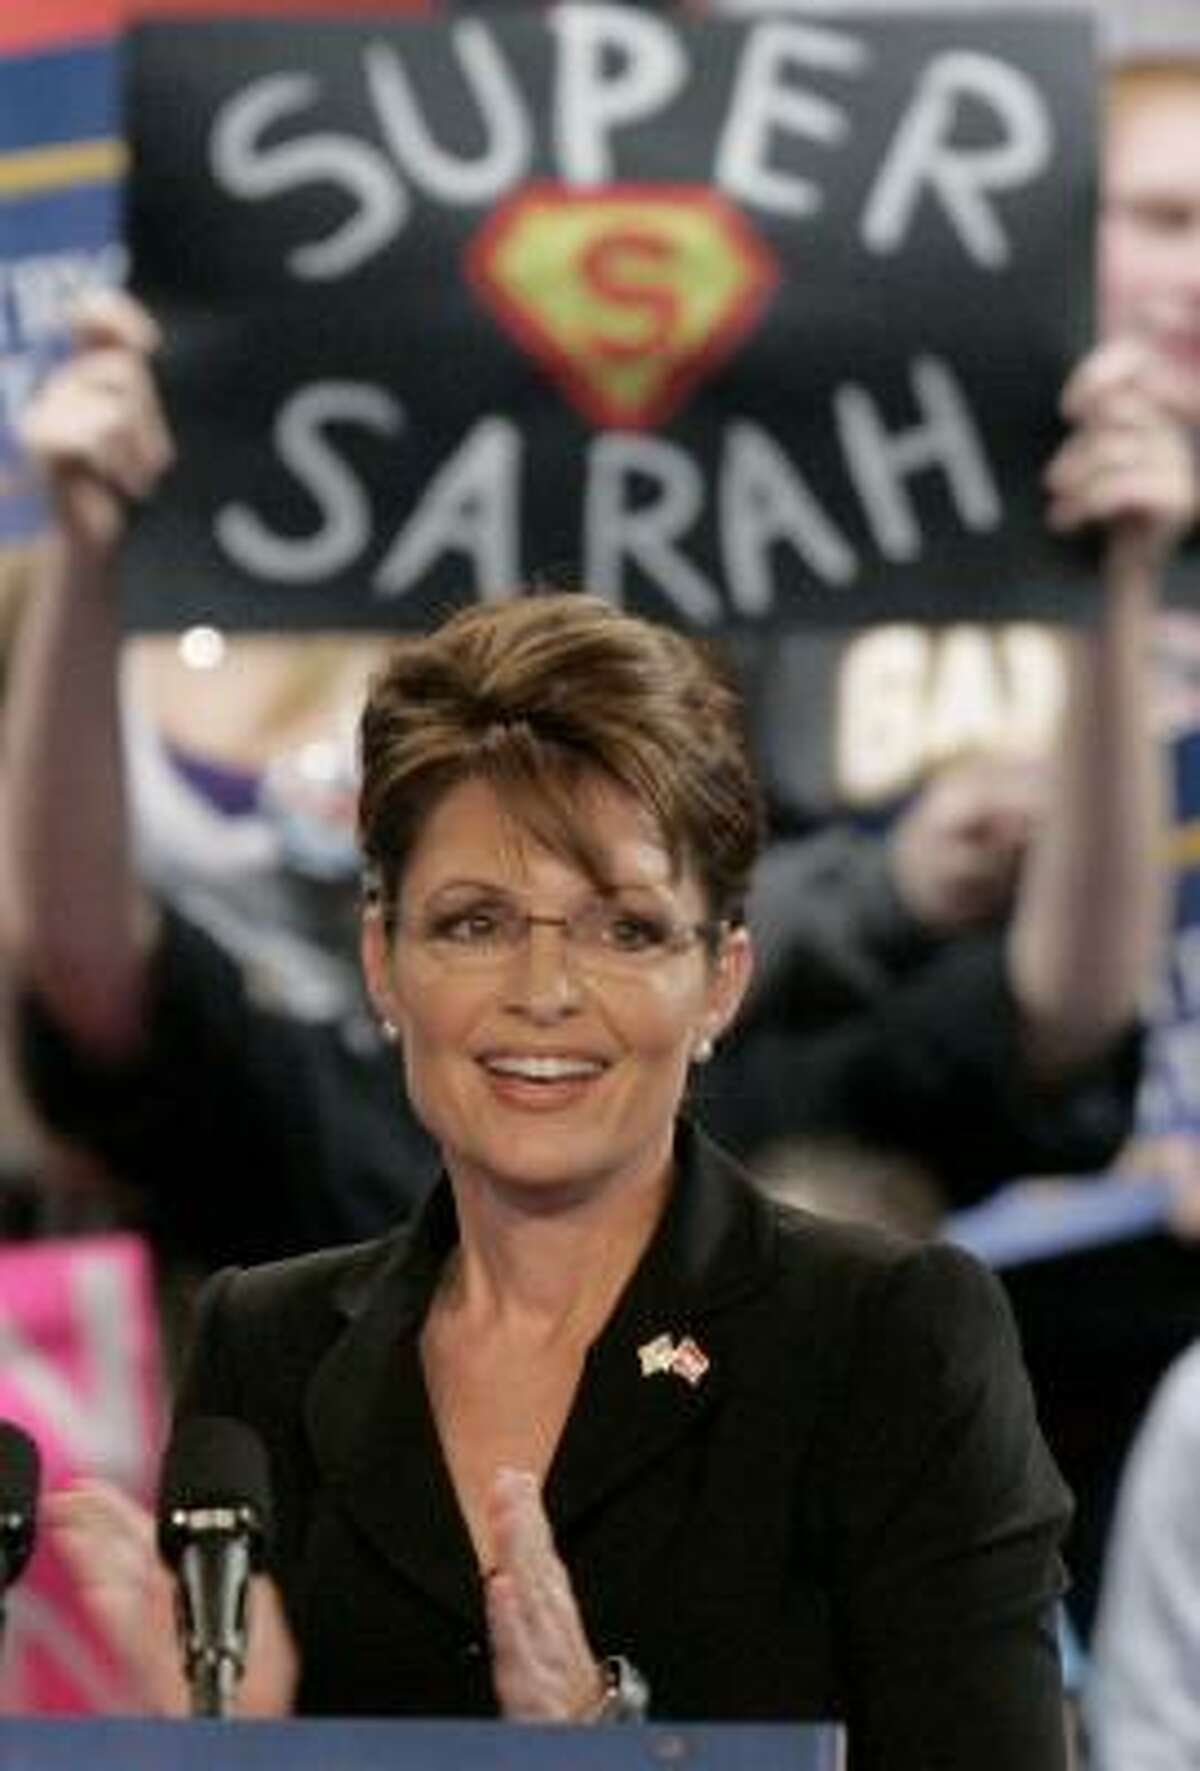 GOP vice-presidential contender Sarah Palin already has said she plans to remain on the national political landscape no matter what happens Tuesday.